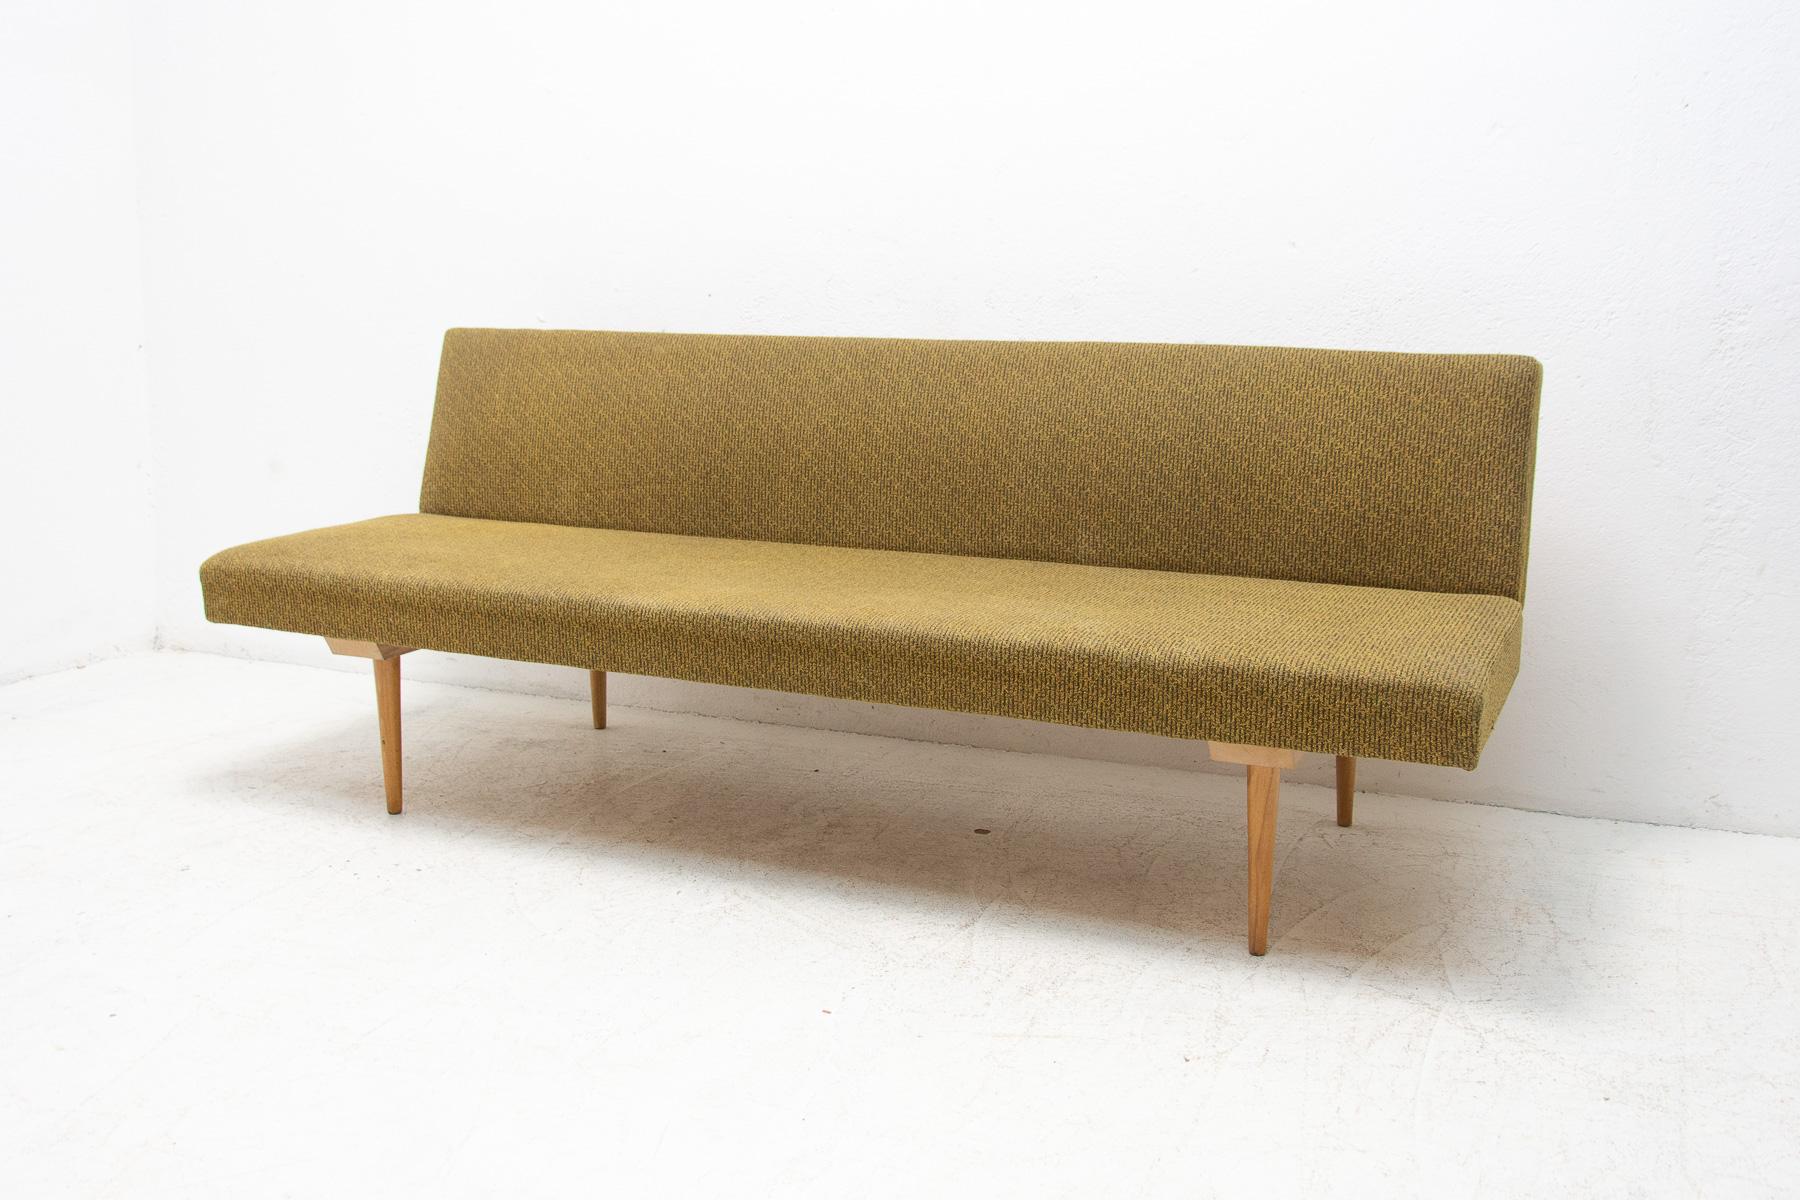 Mid century sofa/daybed, made in the former Czechoslovakia in the 1960´s, designed by Miroslav Navrátil. Material: beech wood, fabric. The sofa is structurally in good Vintage condition, the fabric bears signs of age and using.

Measures: Height: